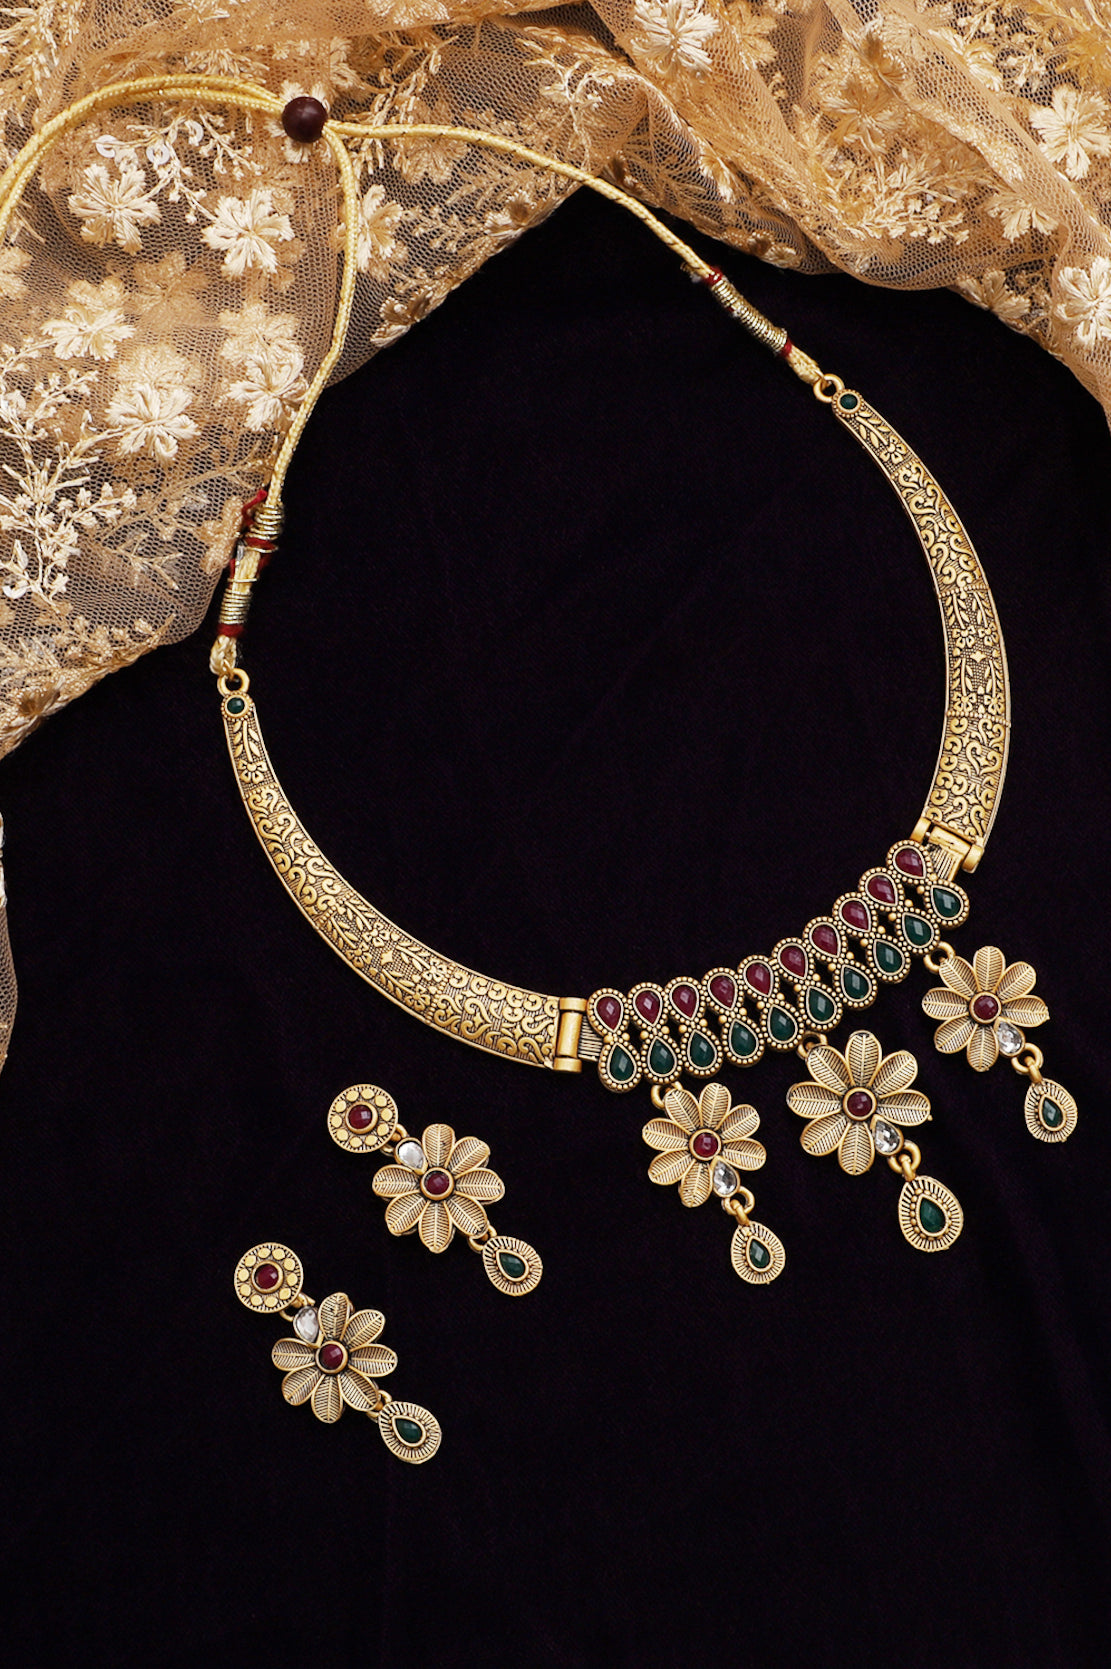  Women's Gold Plated Necklace with Earrings | Buy This Jewellery Online from Mekkna